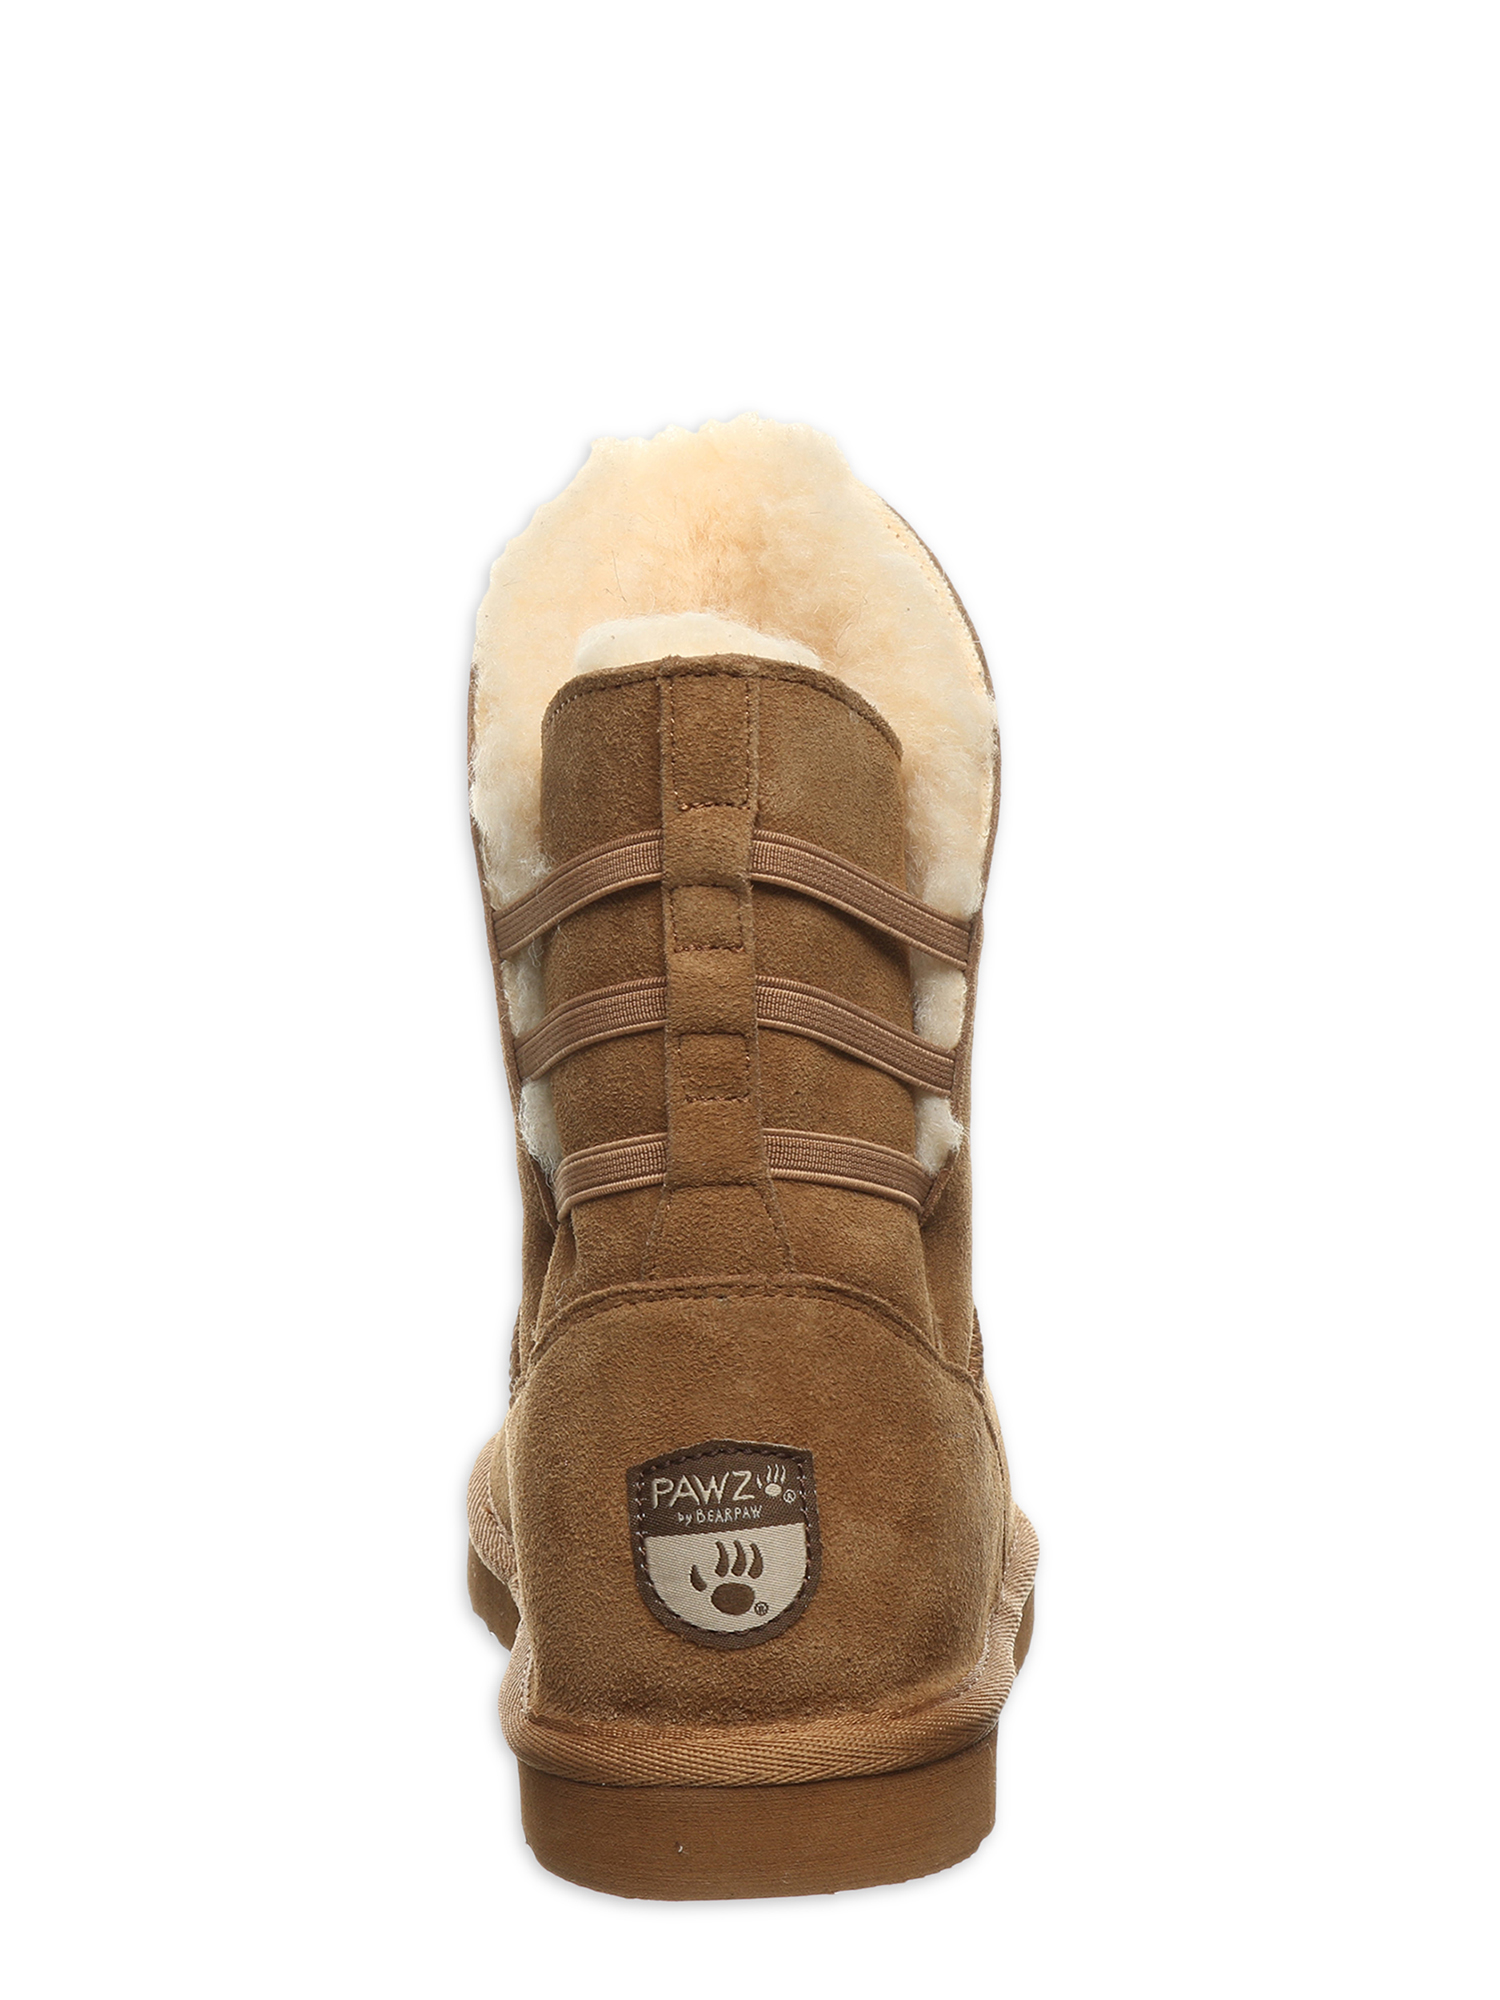 Pawz by Bearpaw Womens Everleigh Faux Fur Lined Suede Boot - image 3 of 5